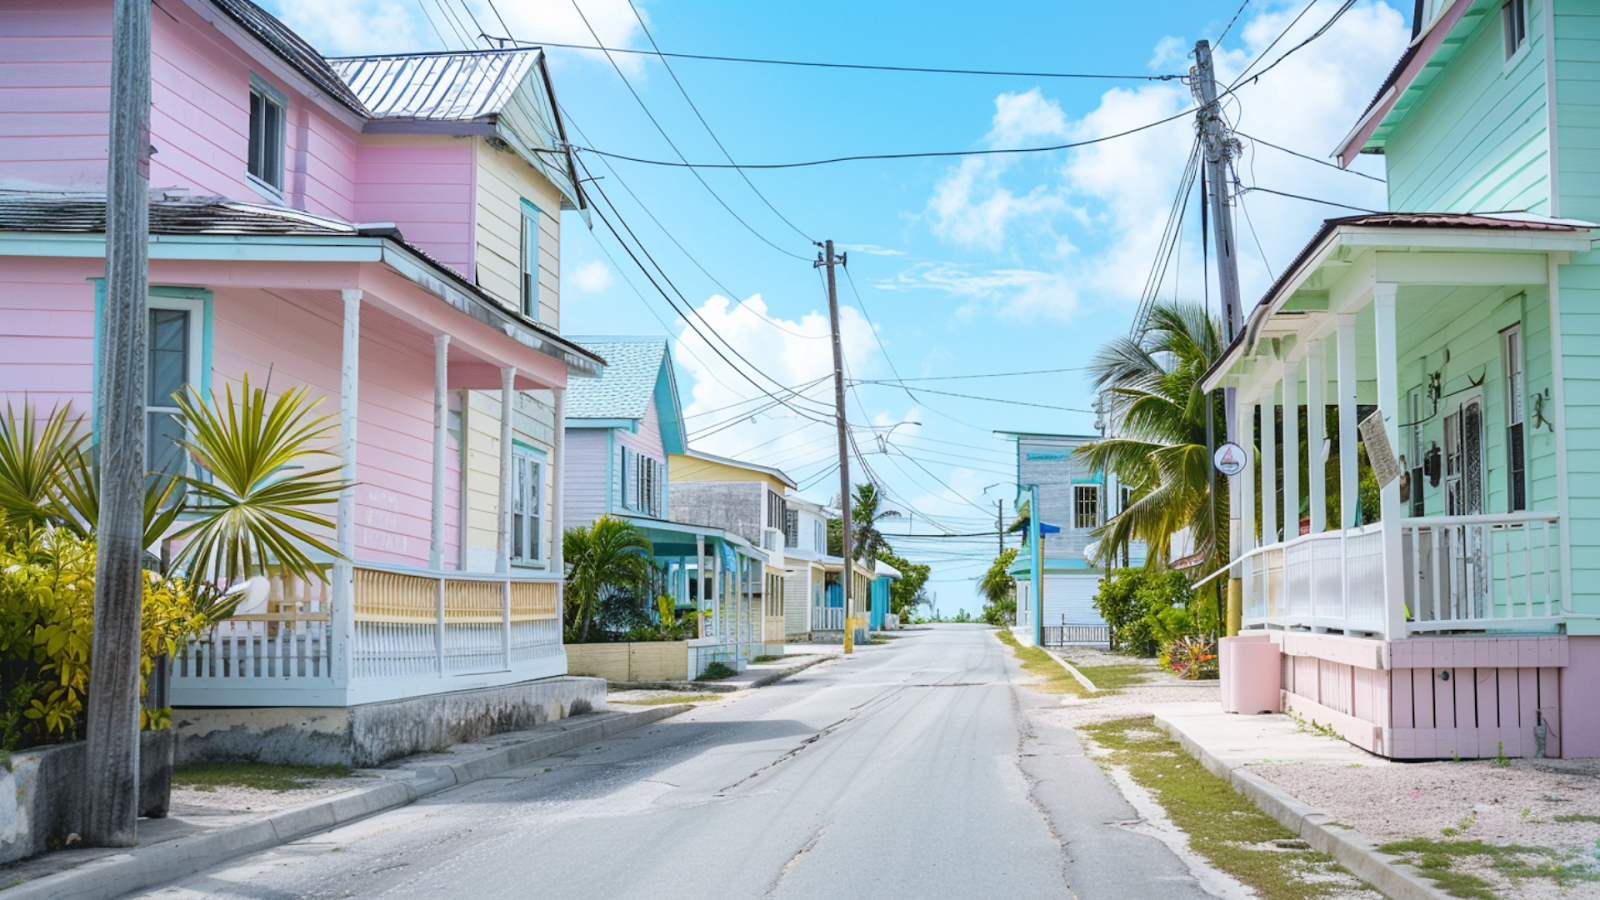 The pastel-colored houses in Dunmore Town